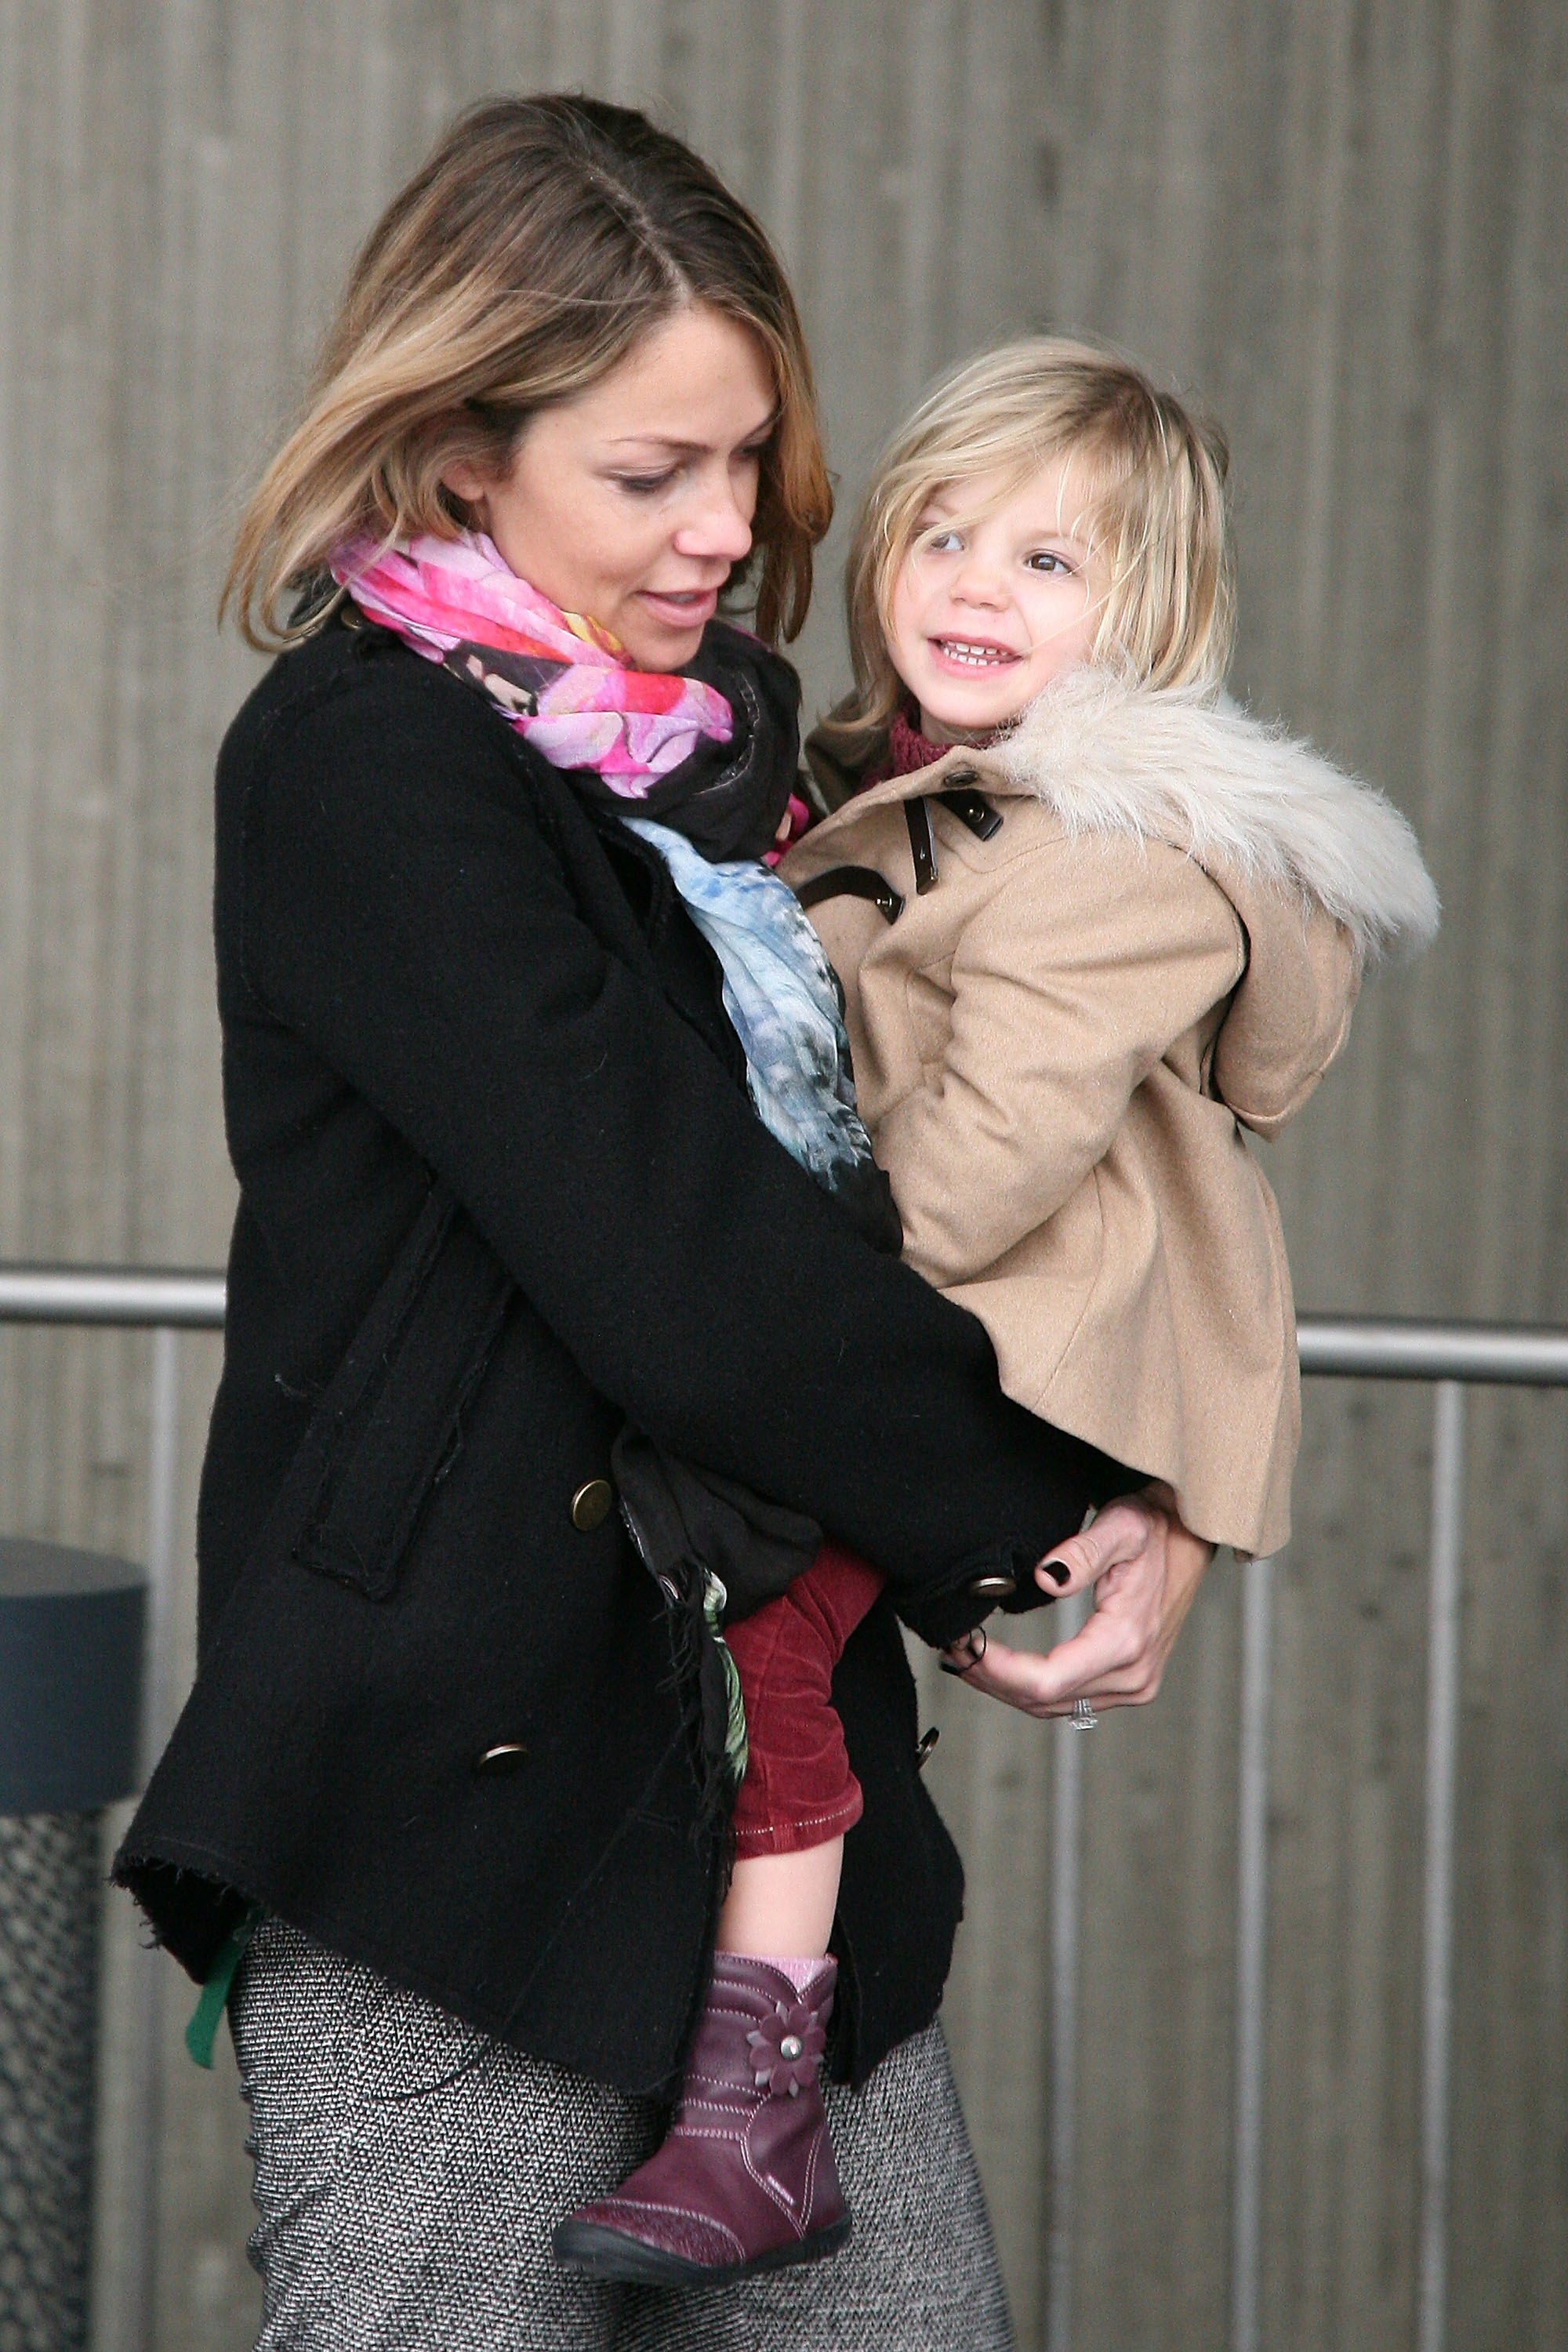 Christine Baumgartner and Grace Avery Costner in Paris, France on January 15, 2013 | Source: Getty Images